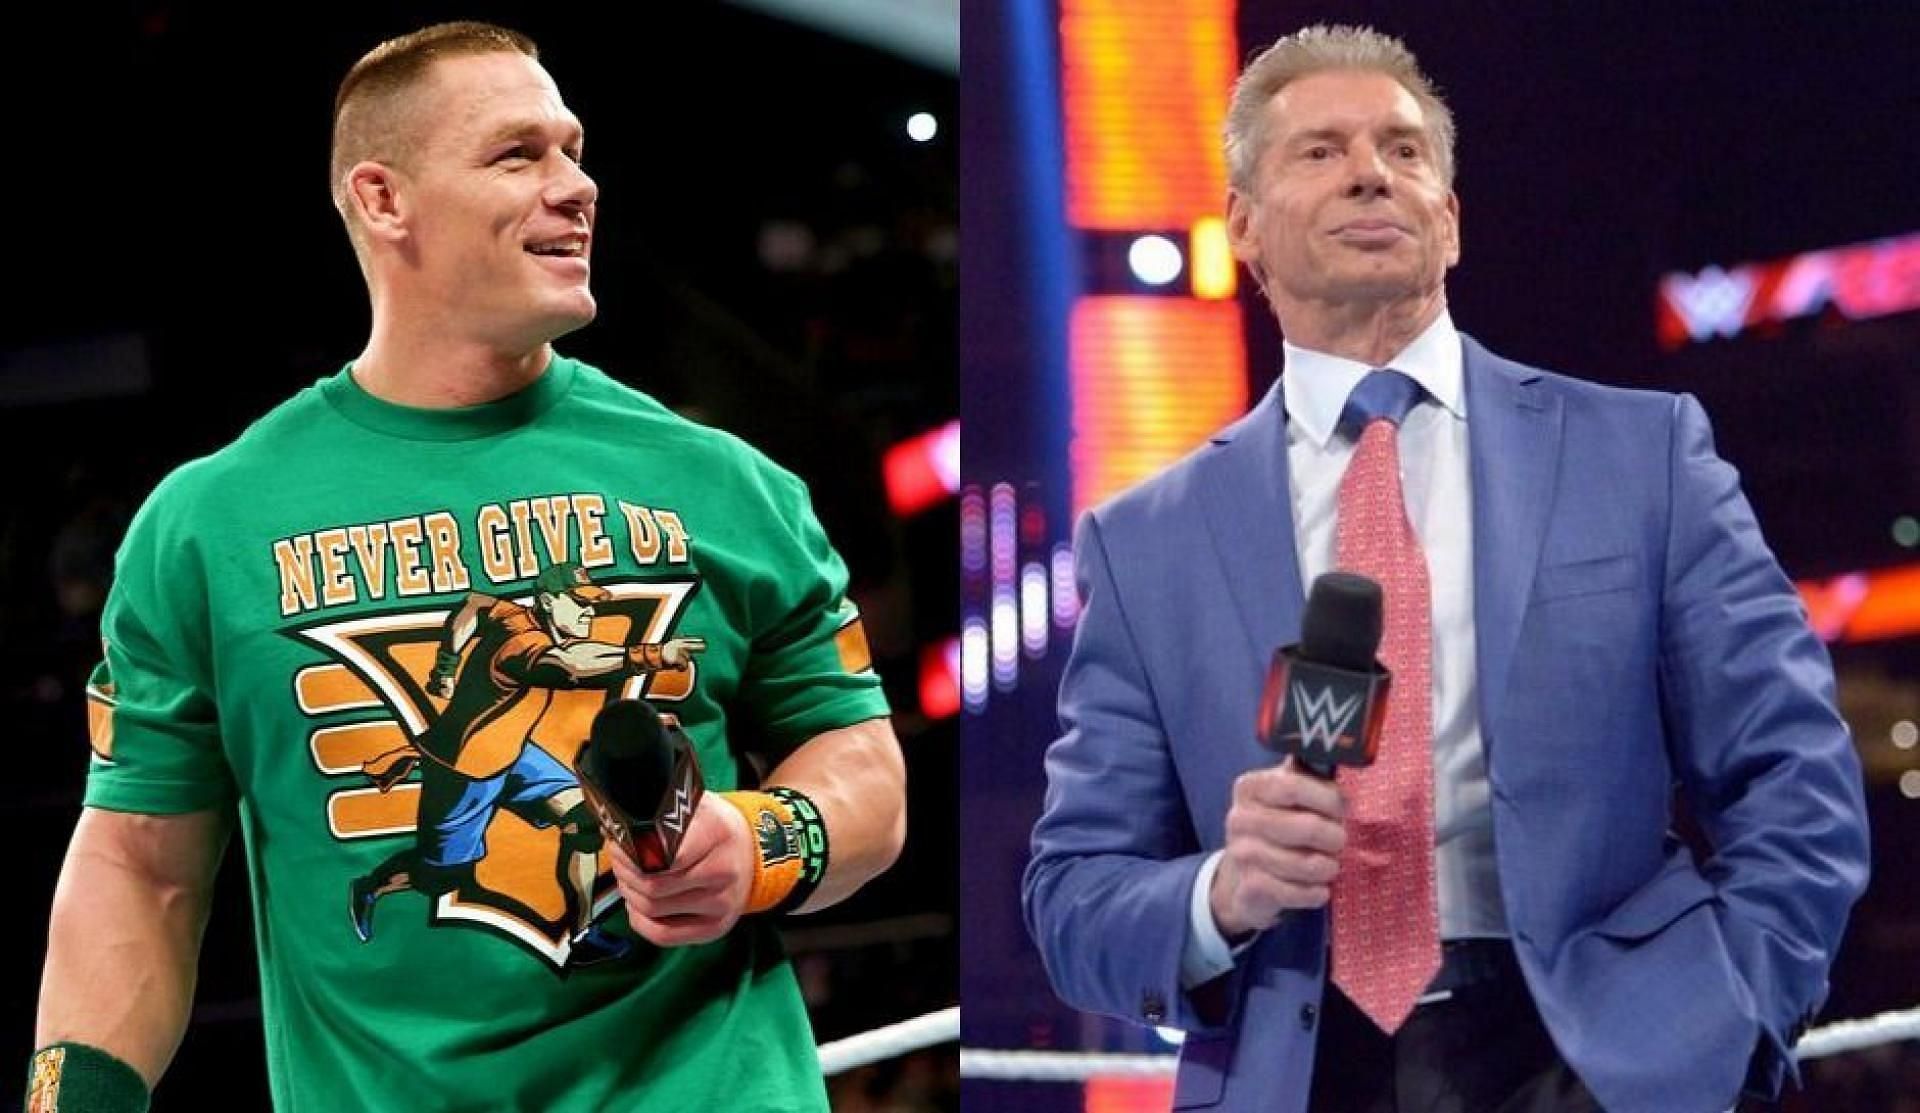 John Cena and Vince McMahon were invovled in some unscripted moments